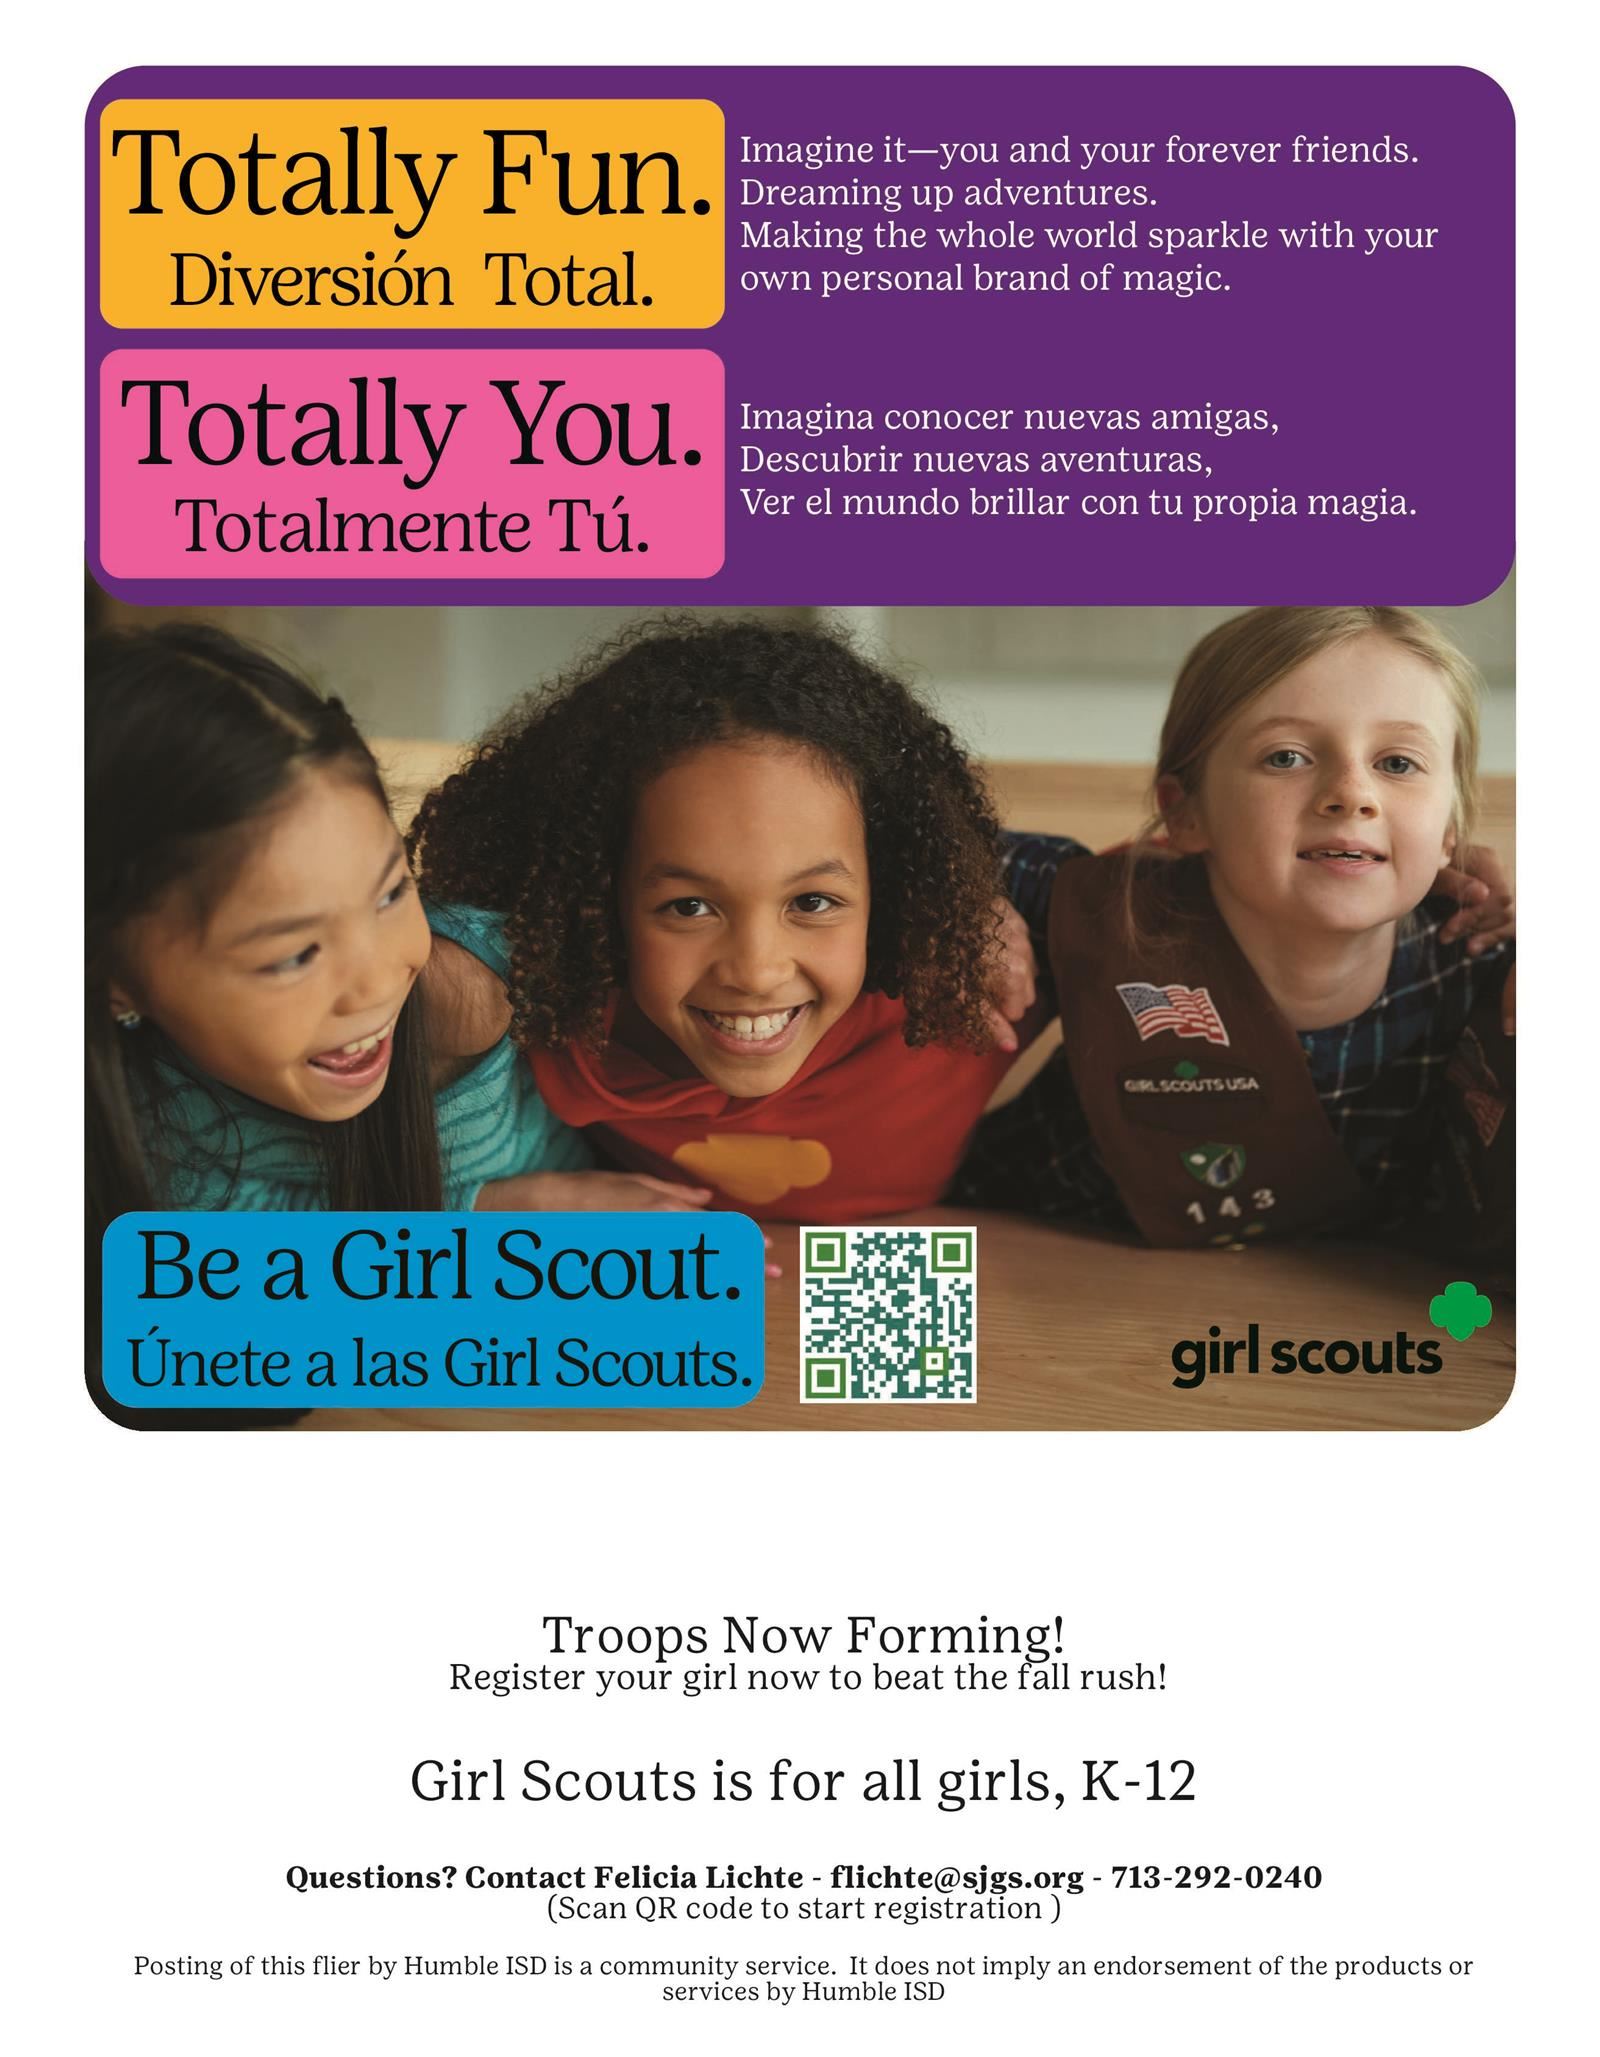 Girls Scout